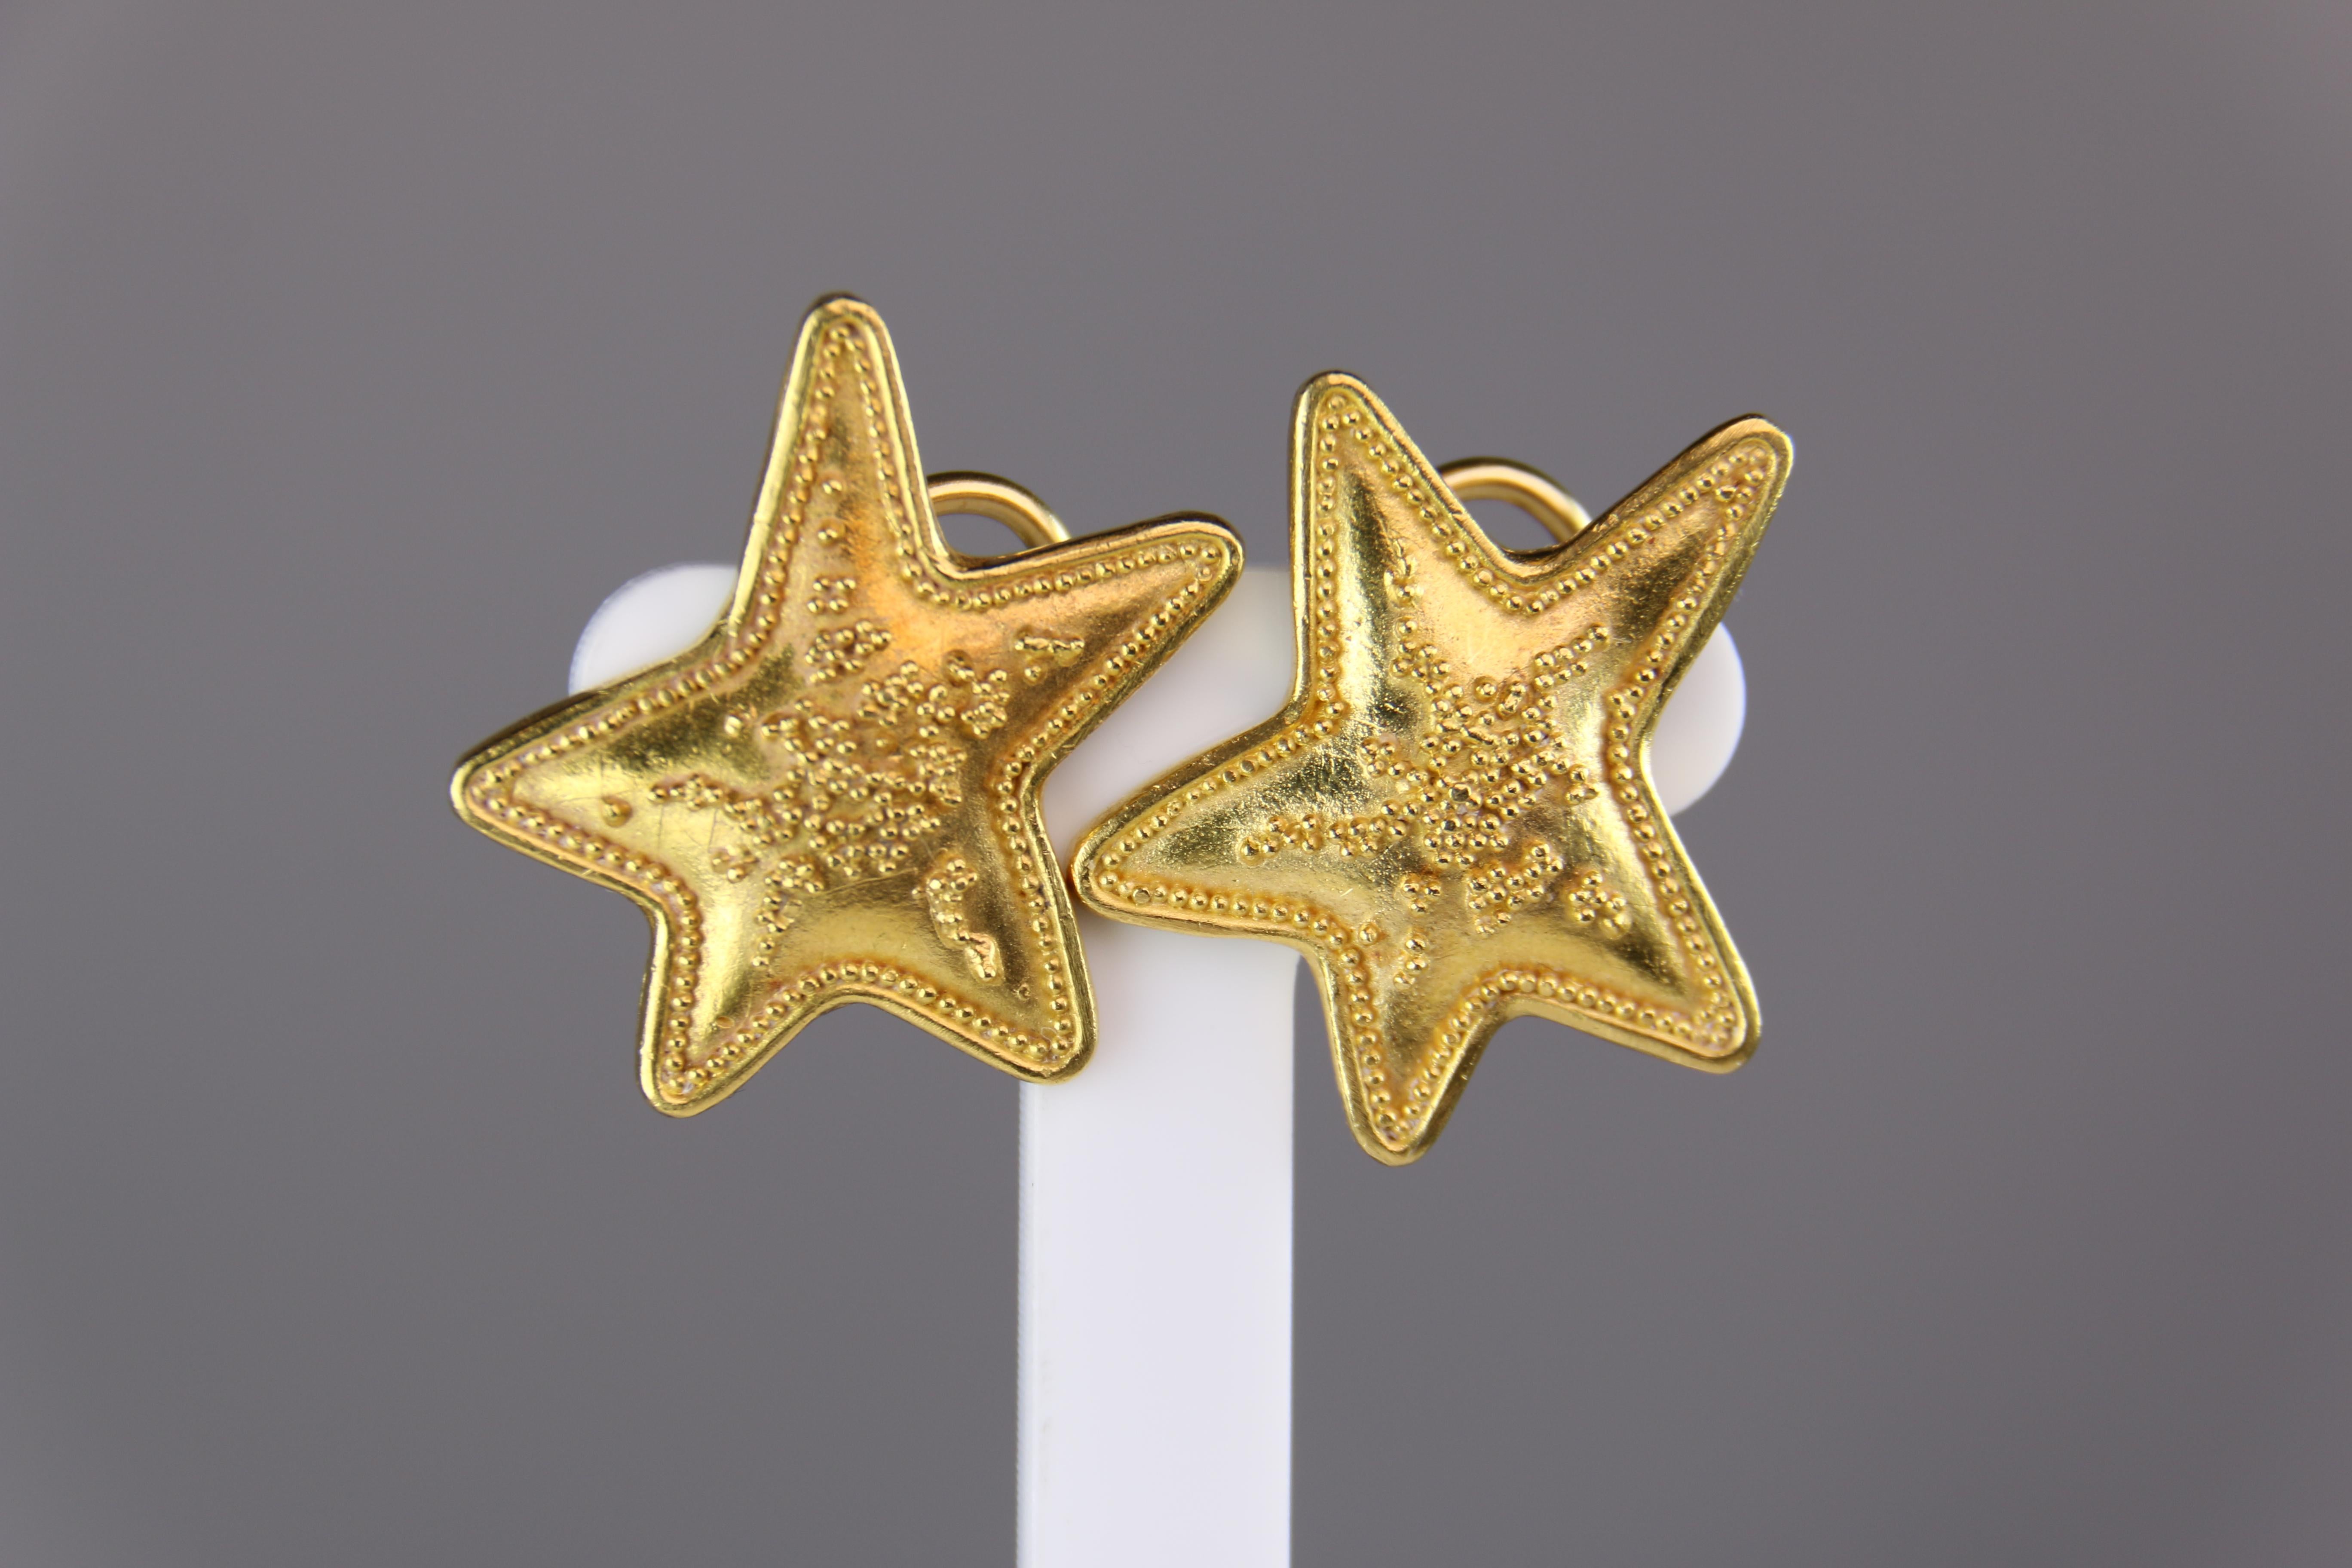 These Star Design Earrings are truly one of a kind. They are hand crafted in yellow gold slightly domes tops with applied granulation work then hand engraved on the flat reverse with designers signature 